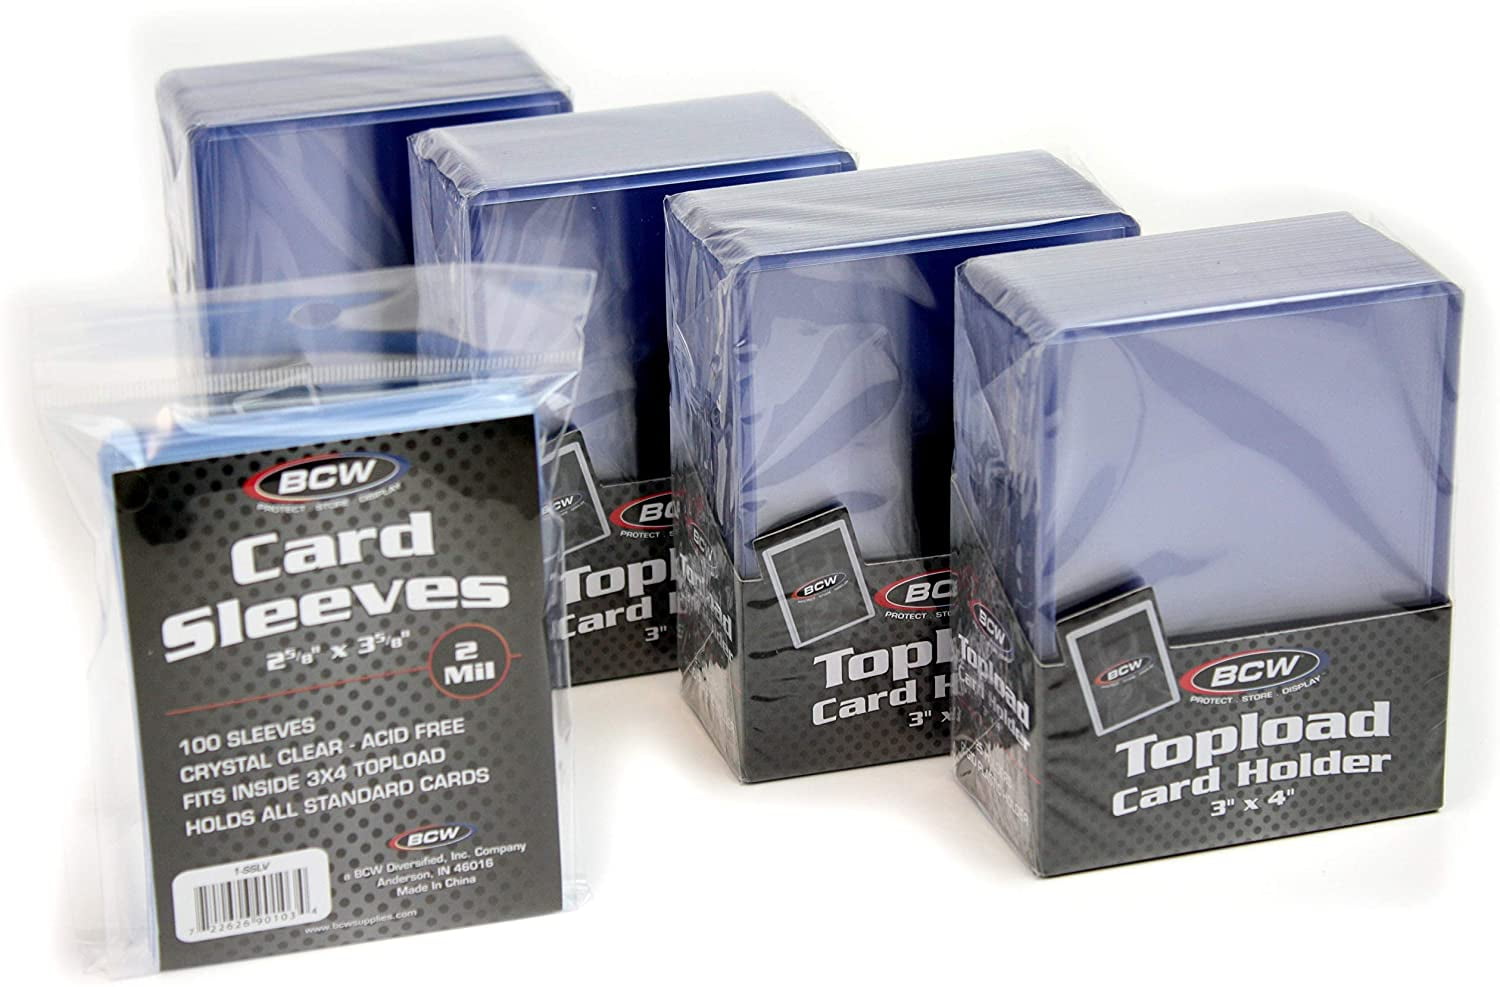 PACK OF 25 25 ULTRA PRO 3" X 4" CLEAR REGULAR TOPLOADERS 